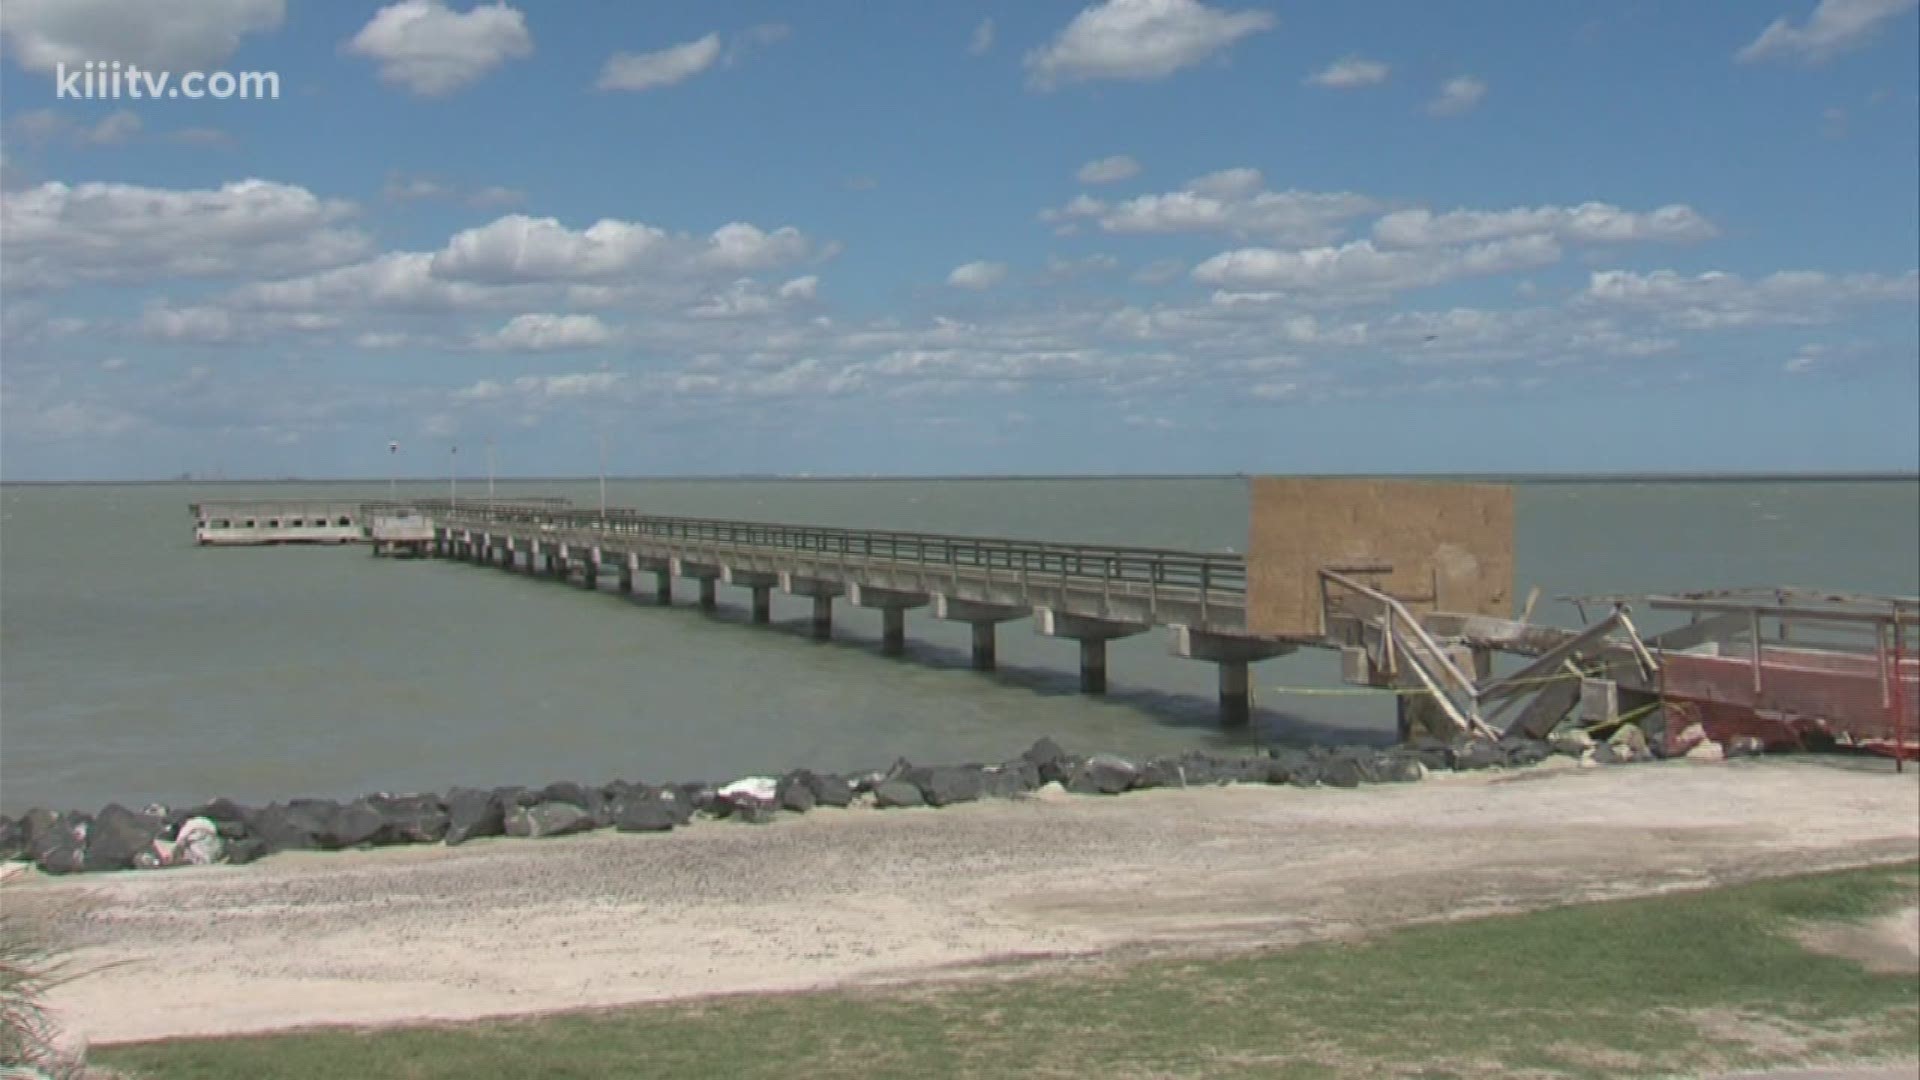 Many Coastal Bend anglers have had to fine some place else to fish since two hot spots were closed -- the Cole Park and Philip Dimmit municipal fishing piers.